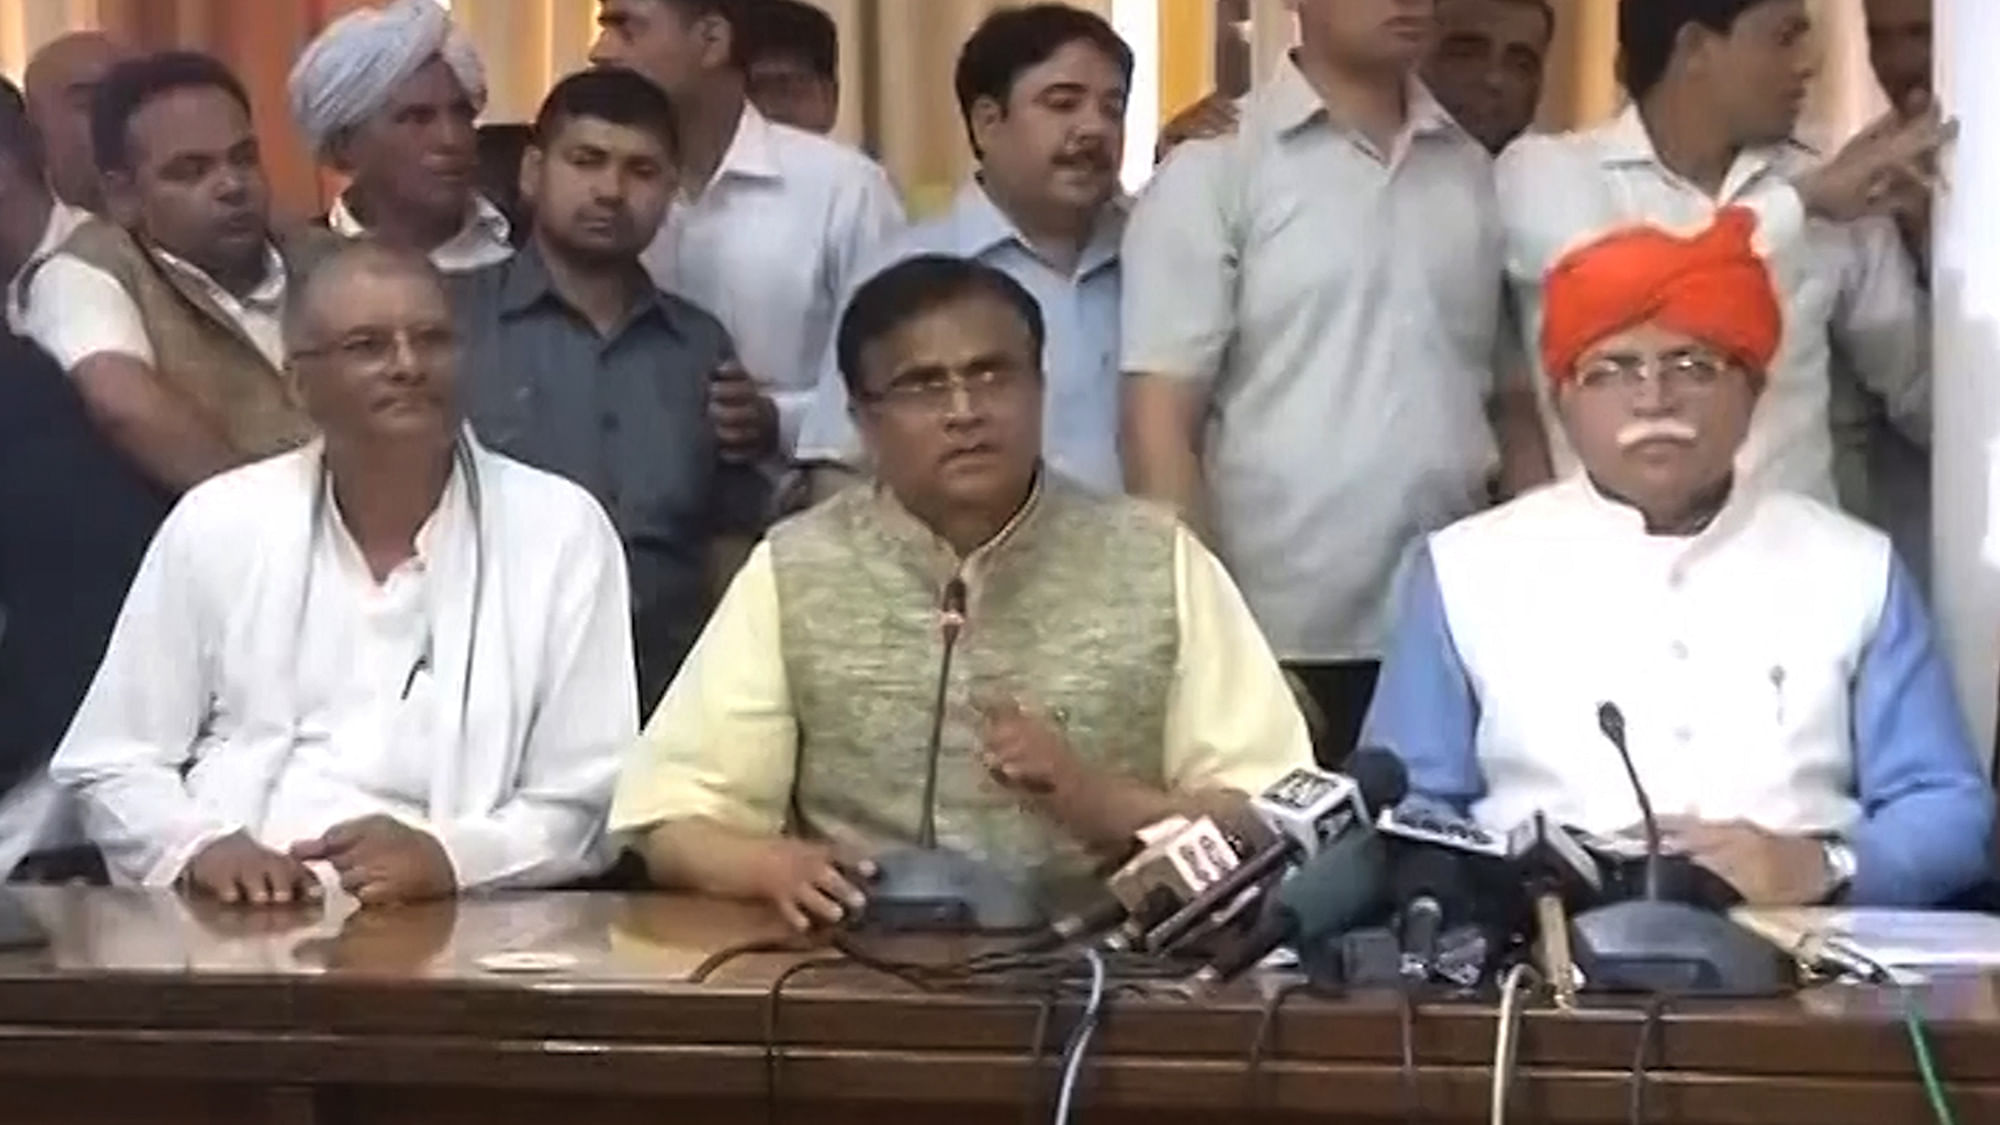 Haryana Chief Minister Manohar Lal Khattar (right) addressing the media after the Jat Reservation Bill was passed in the Haryana Assembly on Tuesday. (Photo: ANI screengrab)